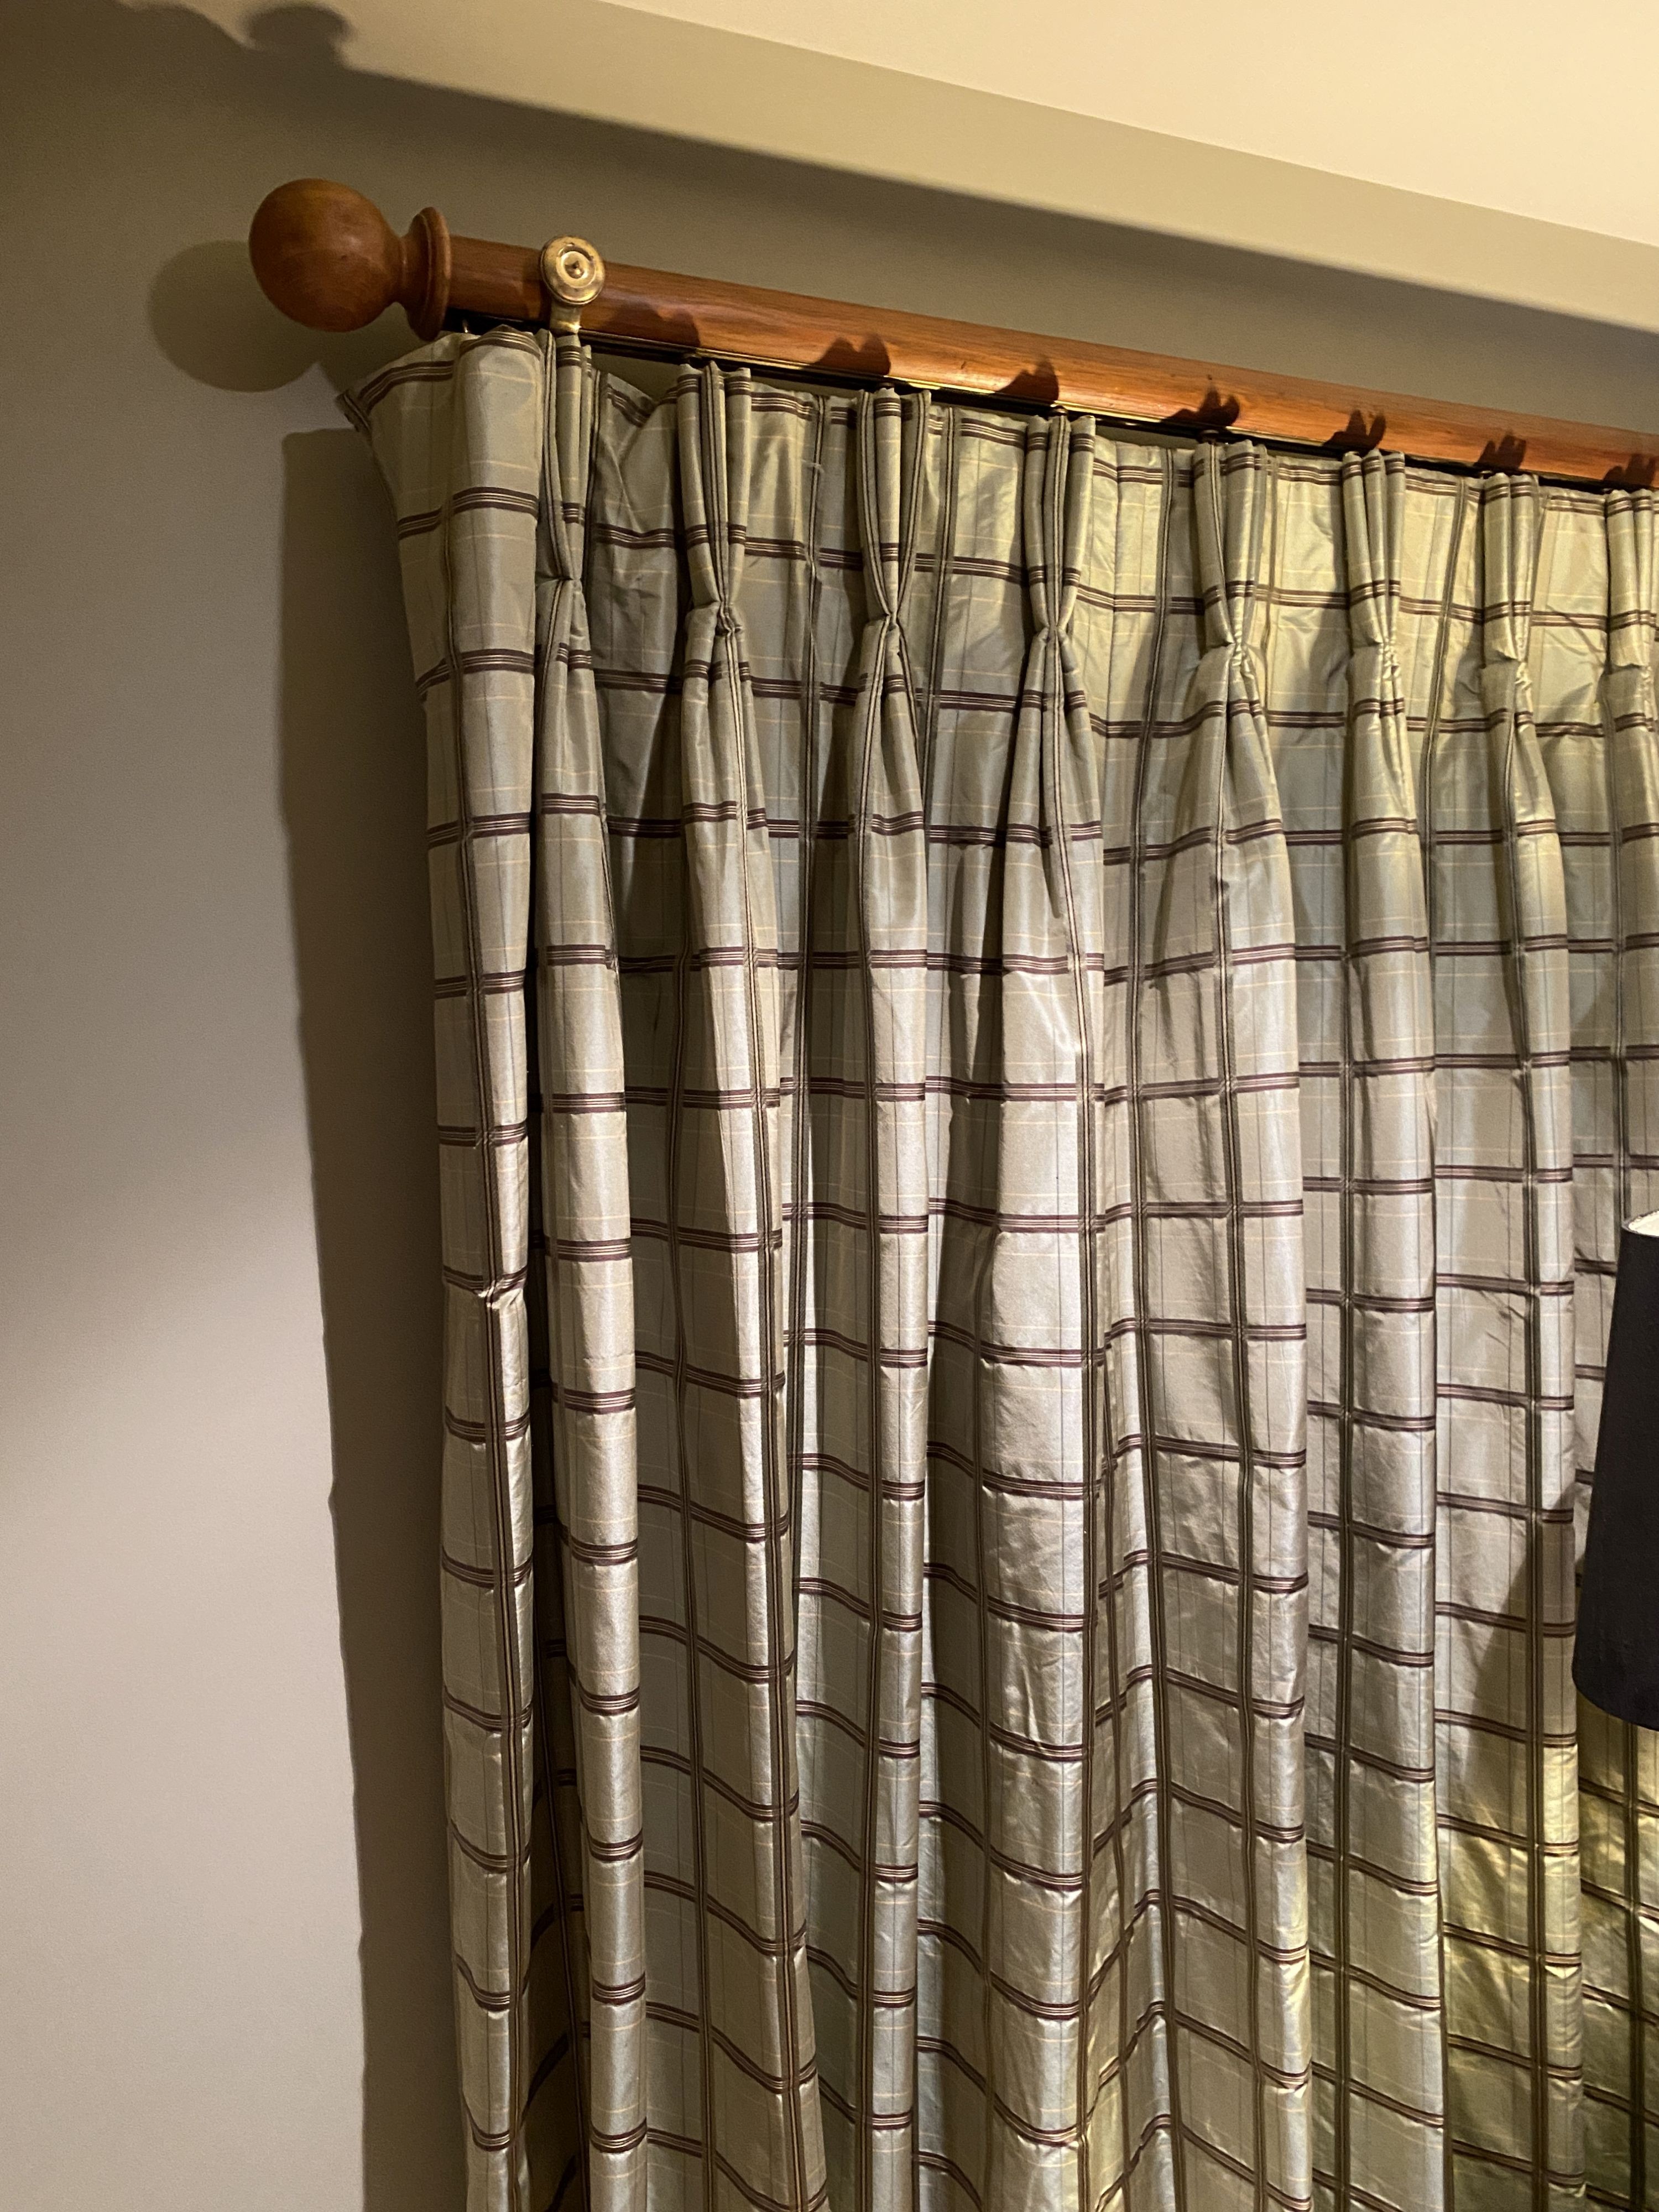 A pair of eau de nil silk curtains with check pattern, drop 207cm, made to fit an aperture of 3m